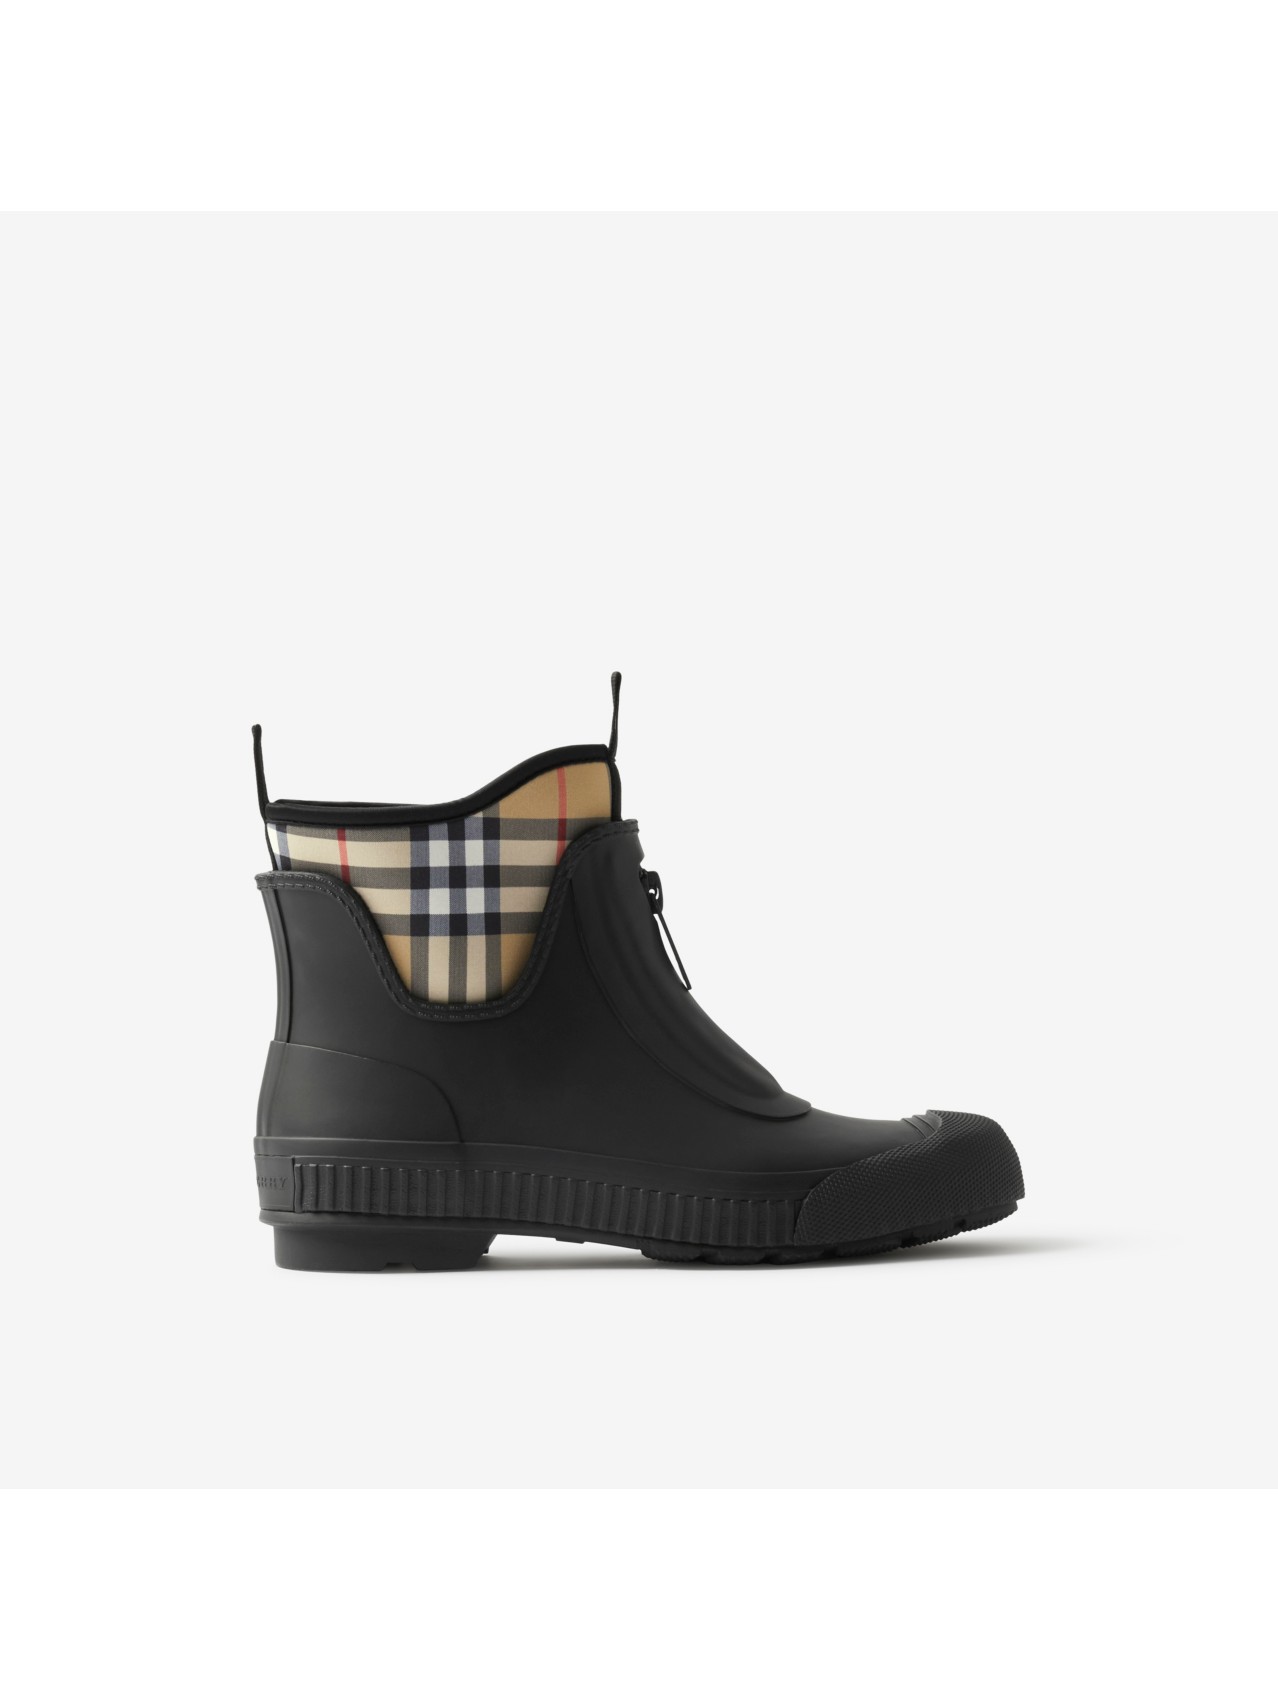 Women's Designer Boots | Ankle & Knee-high | Burberry® Official